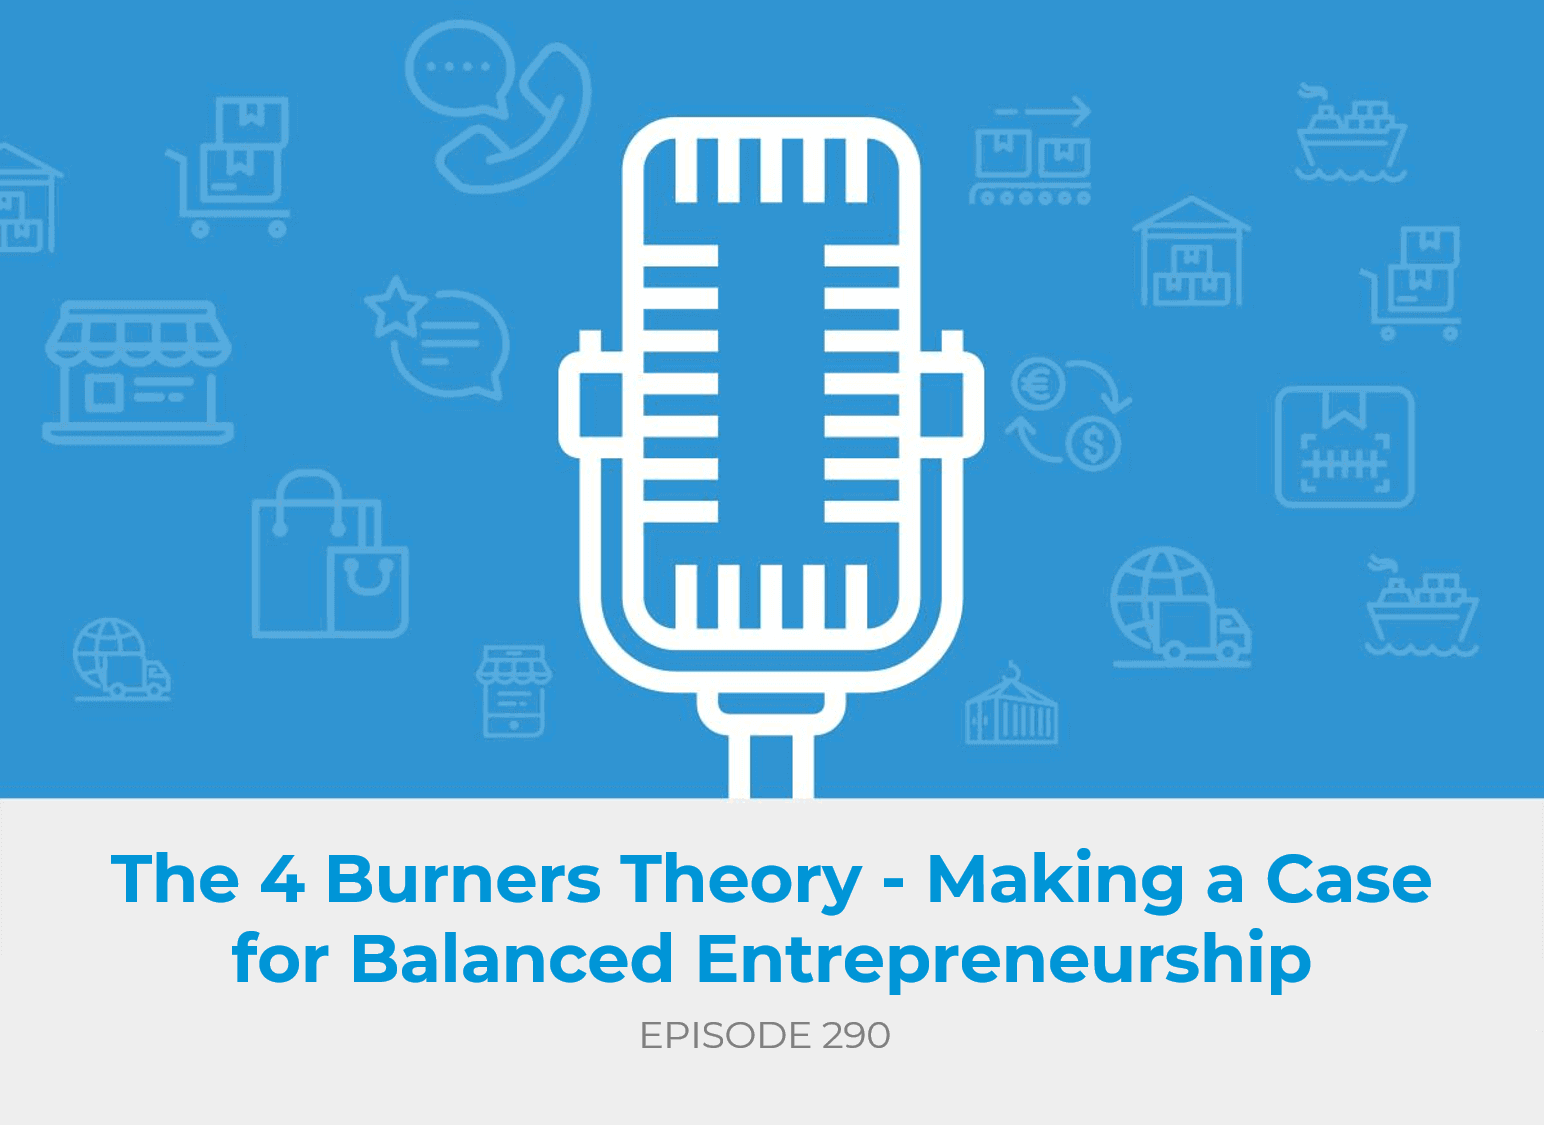 The 4 Burners Theory - Making a Case for Balanced Entrepreneurship